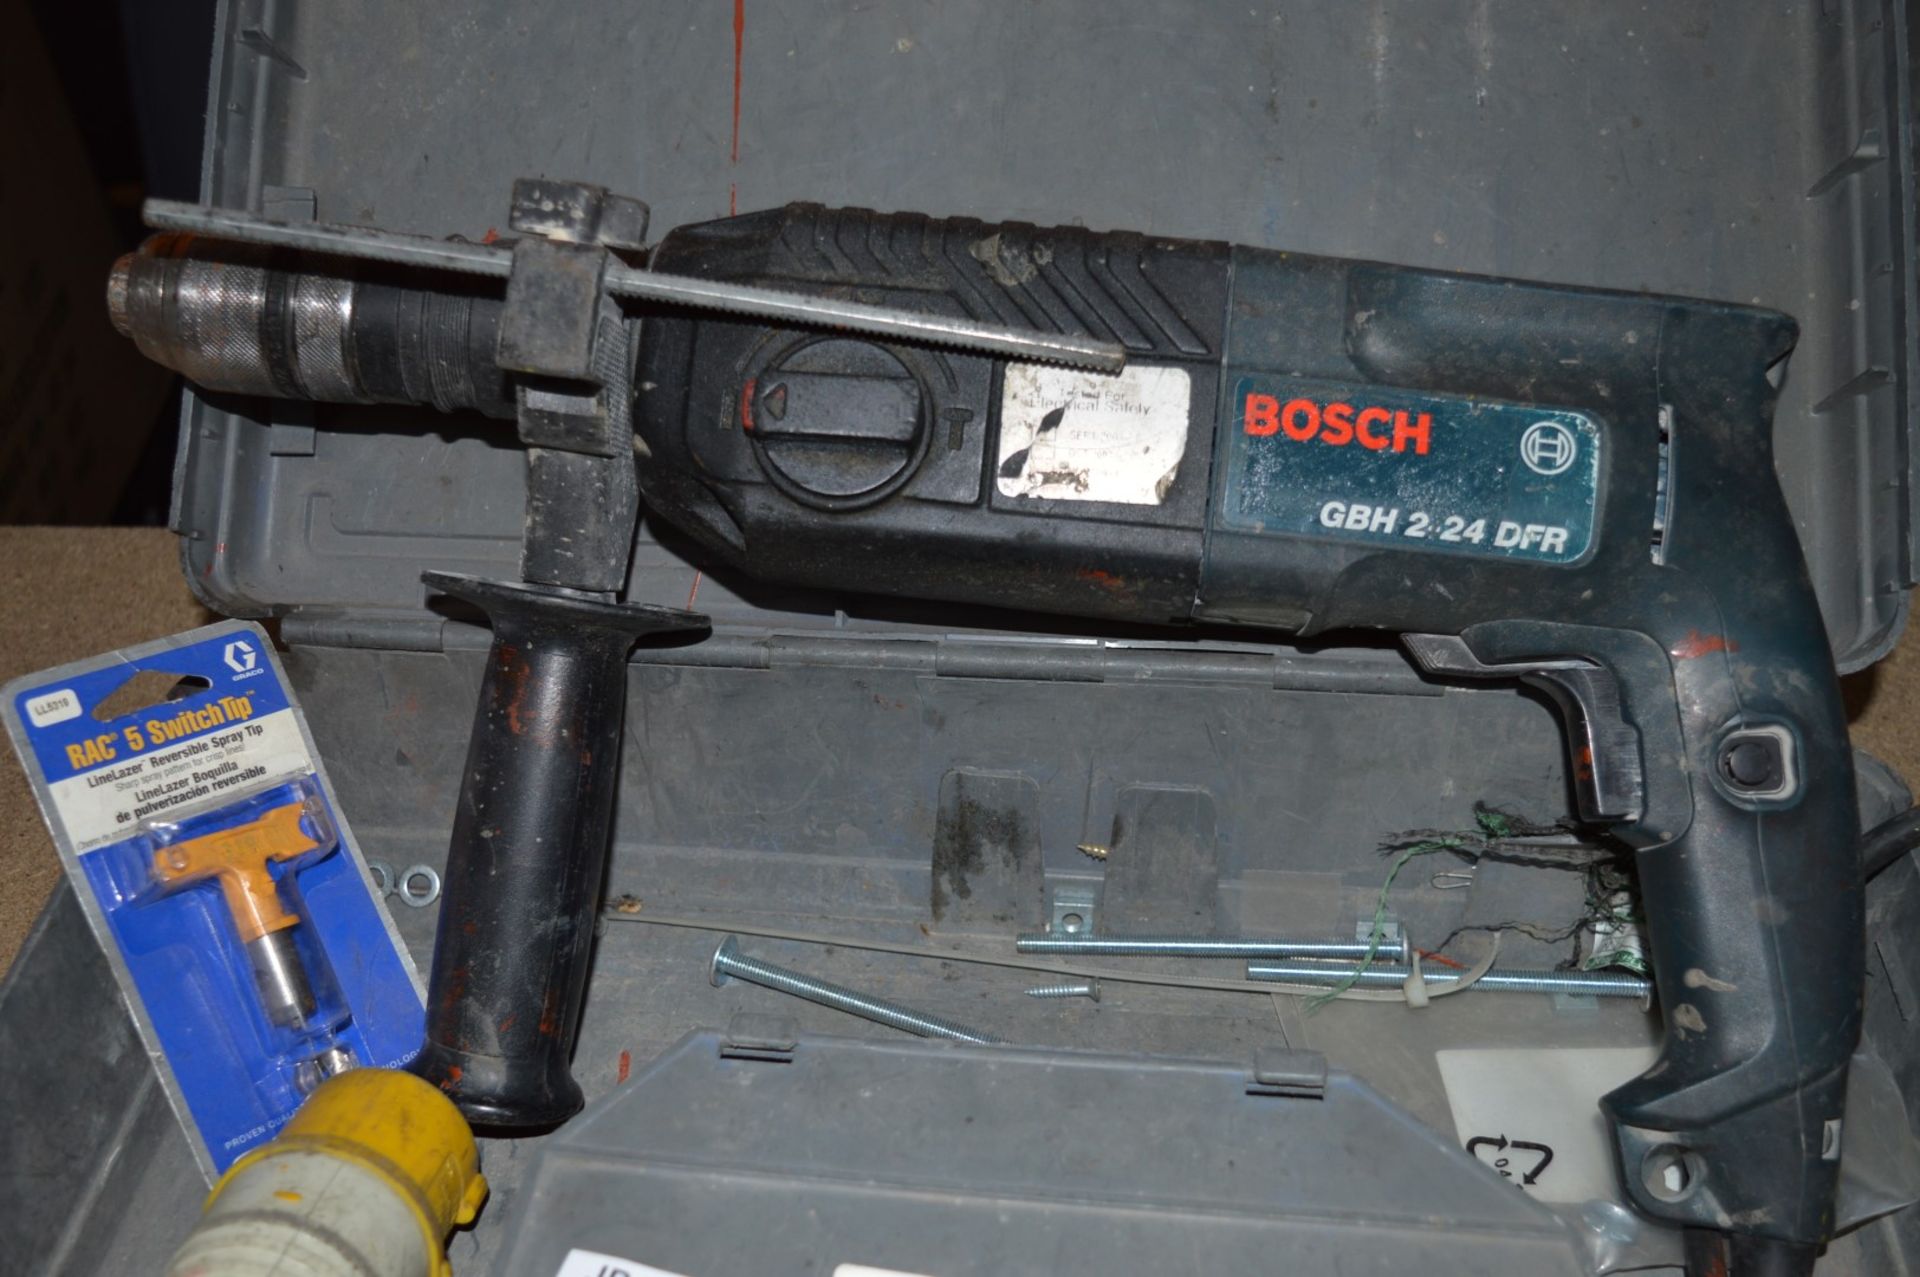 1 x Bosch GBH 2-24 DFR Hammer Drill - 110v With Case and Accessories - CL011 - Ref JP435 - Location: